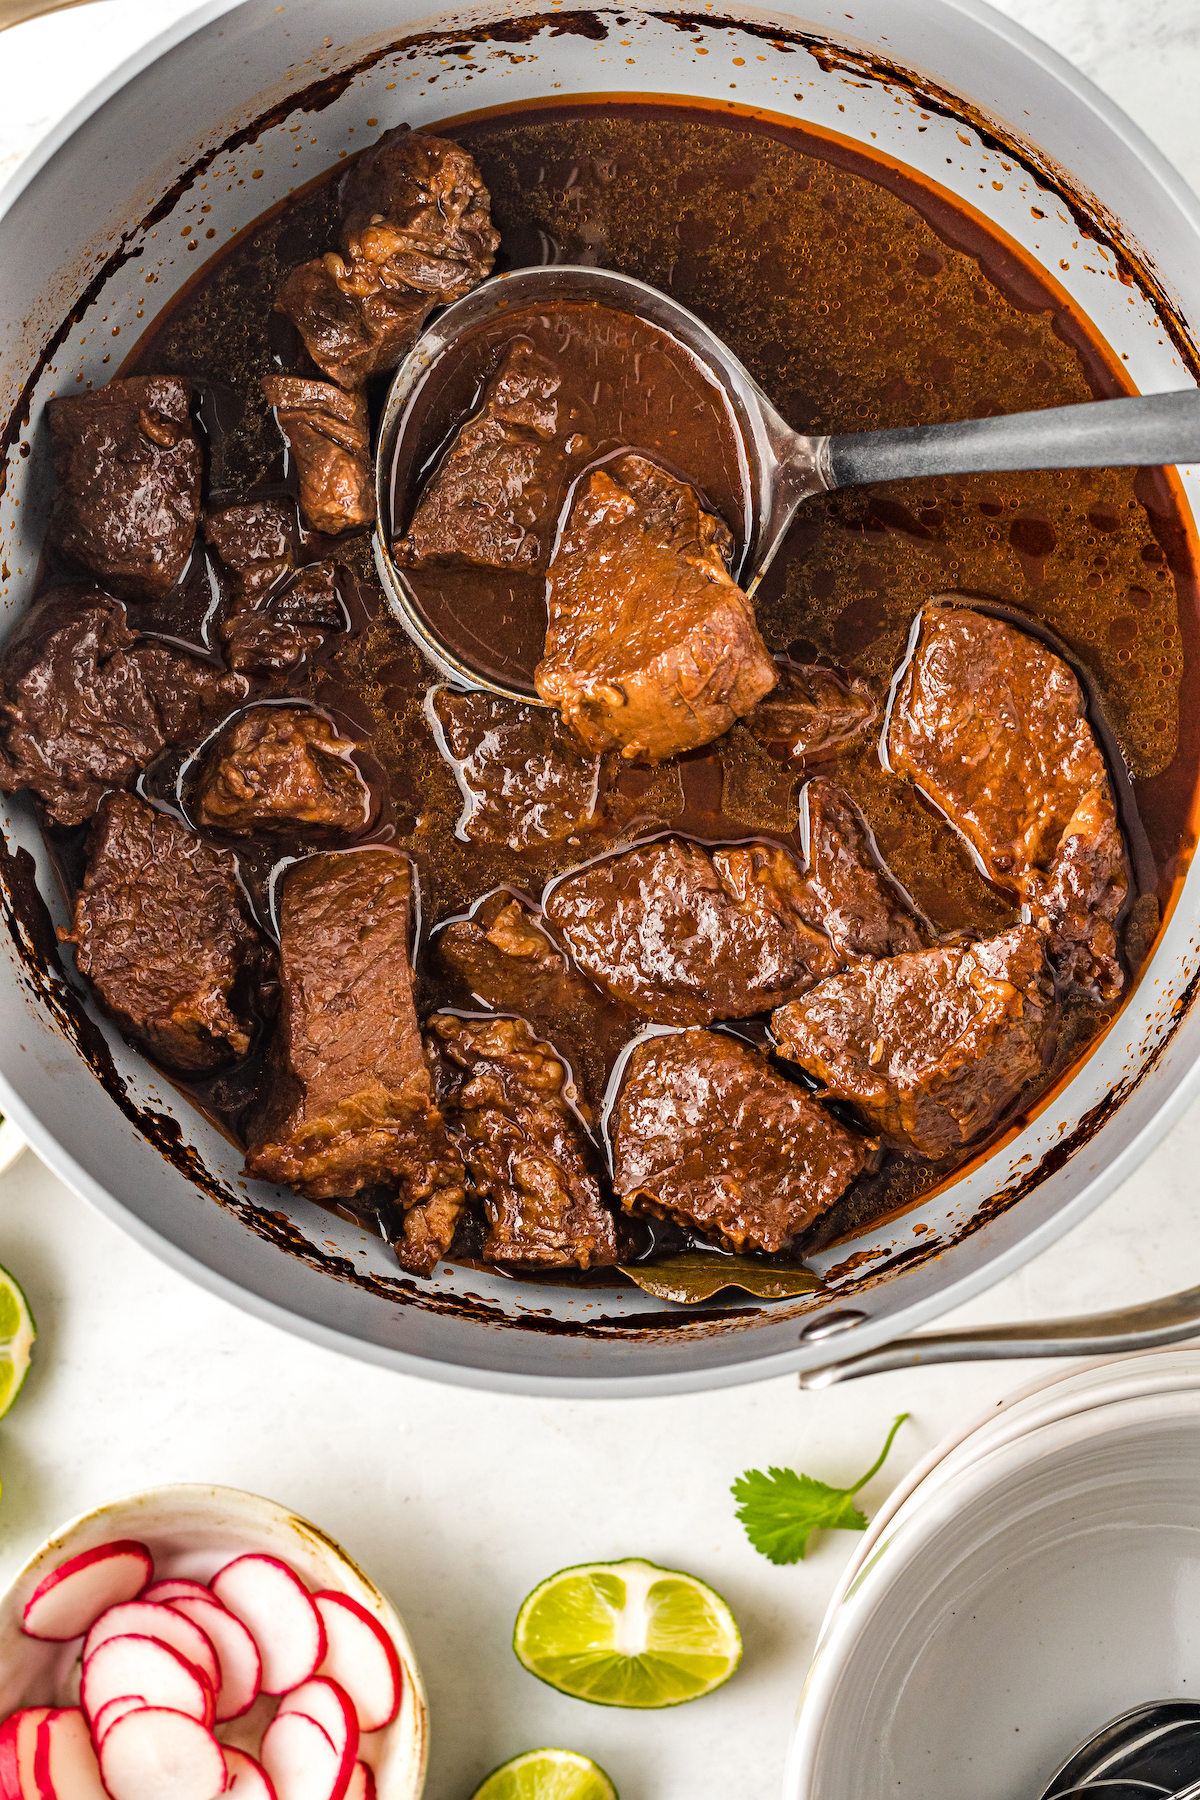 Cooked beef birria without toppings.